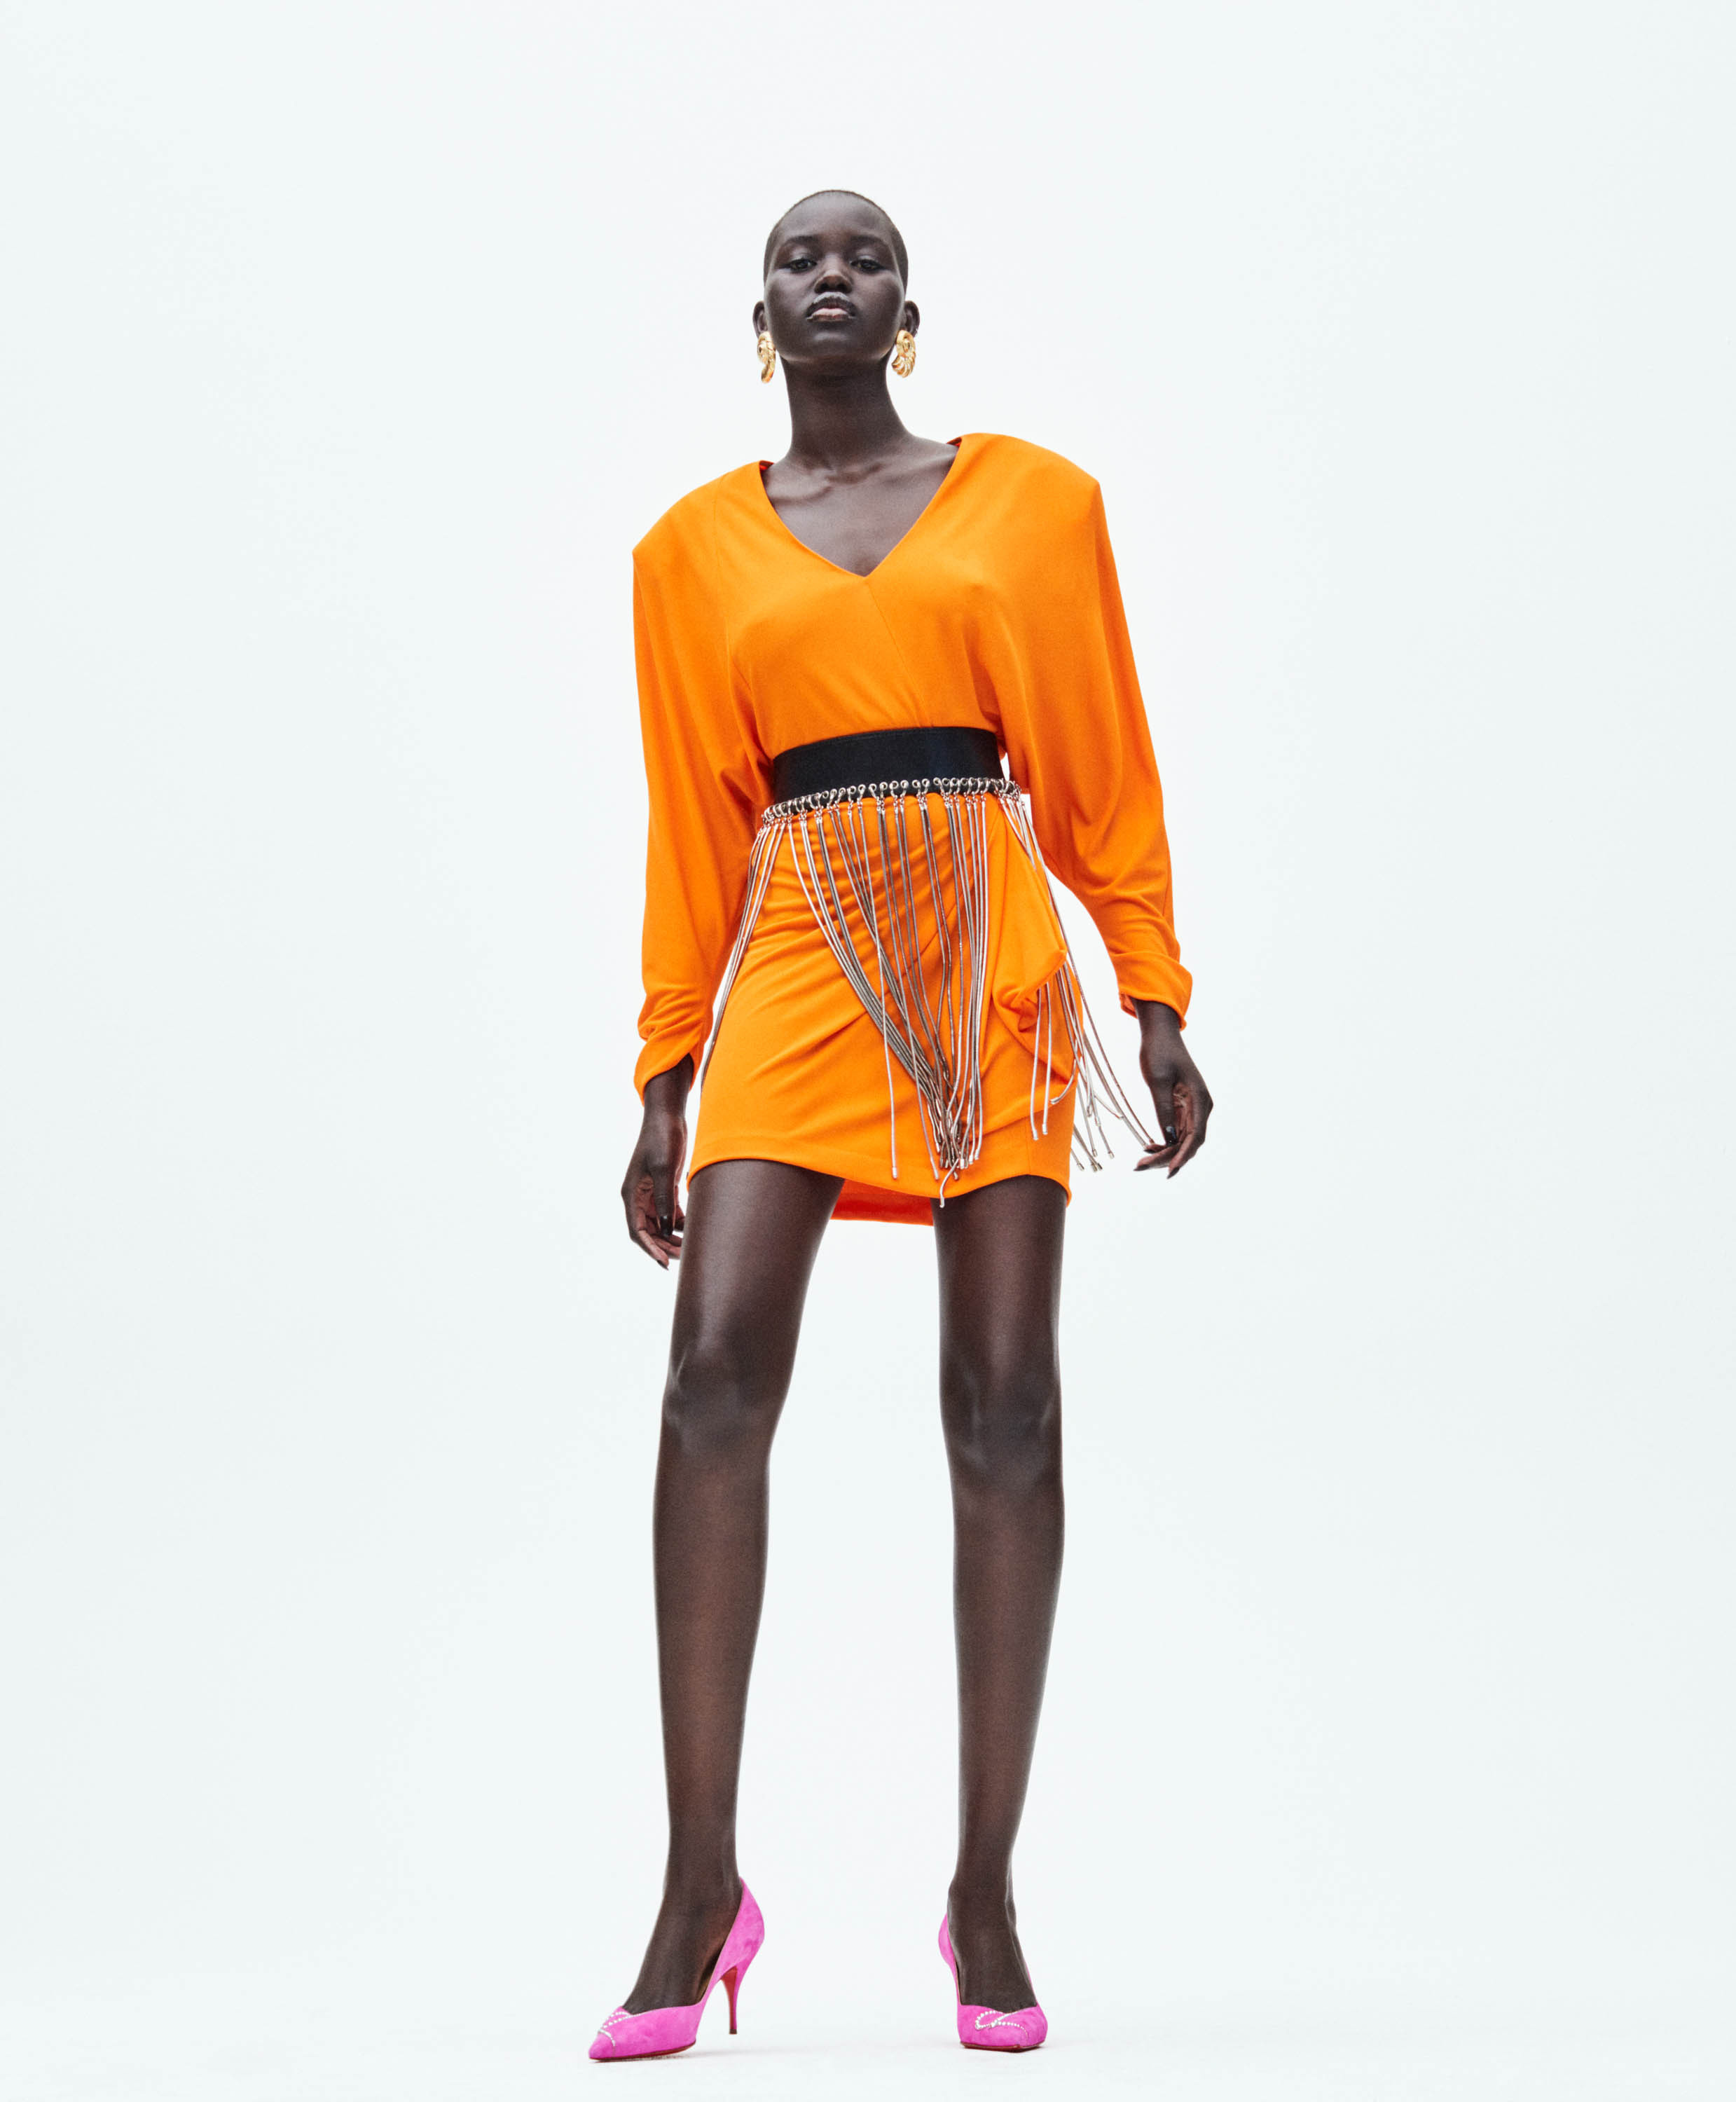 Adut Akech and her Mile Long Legs - Photo 7